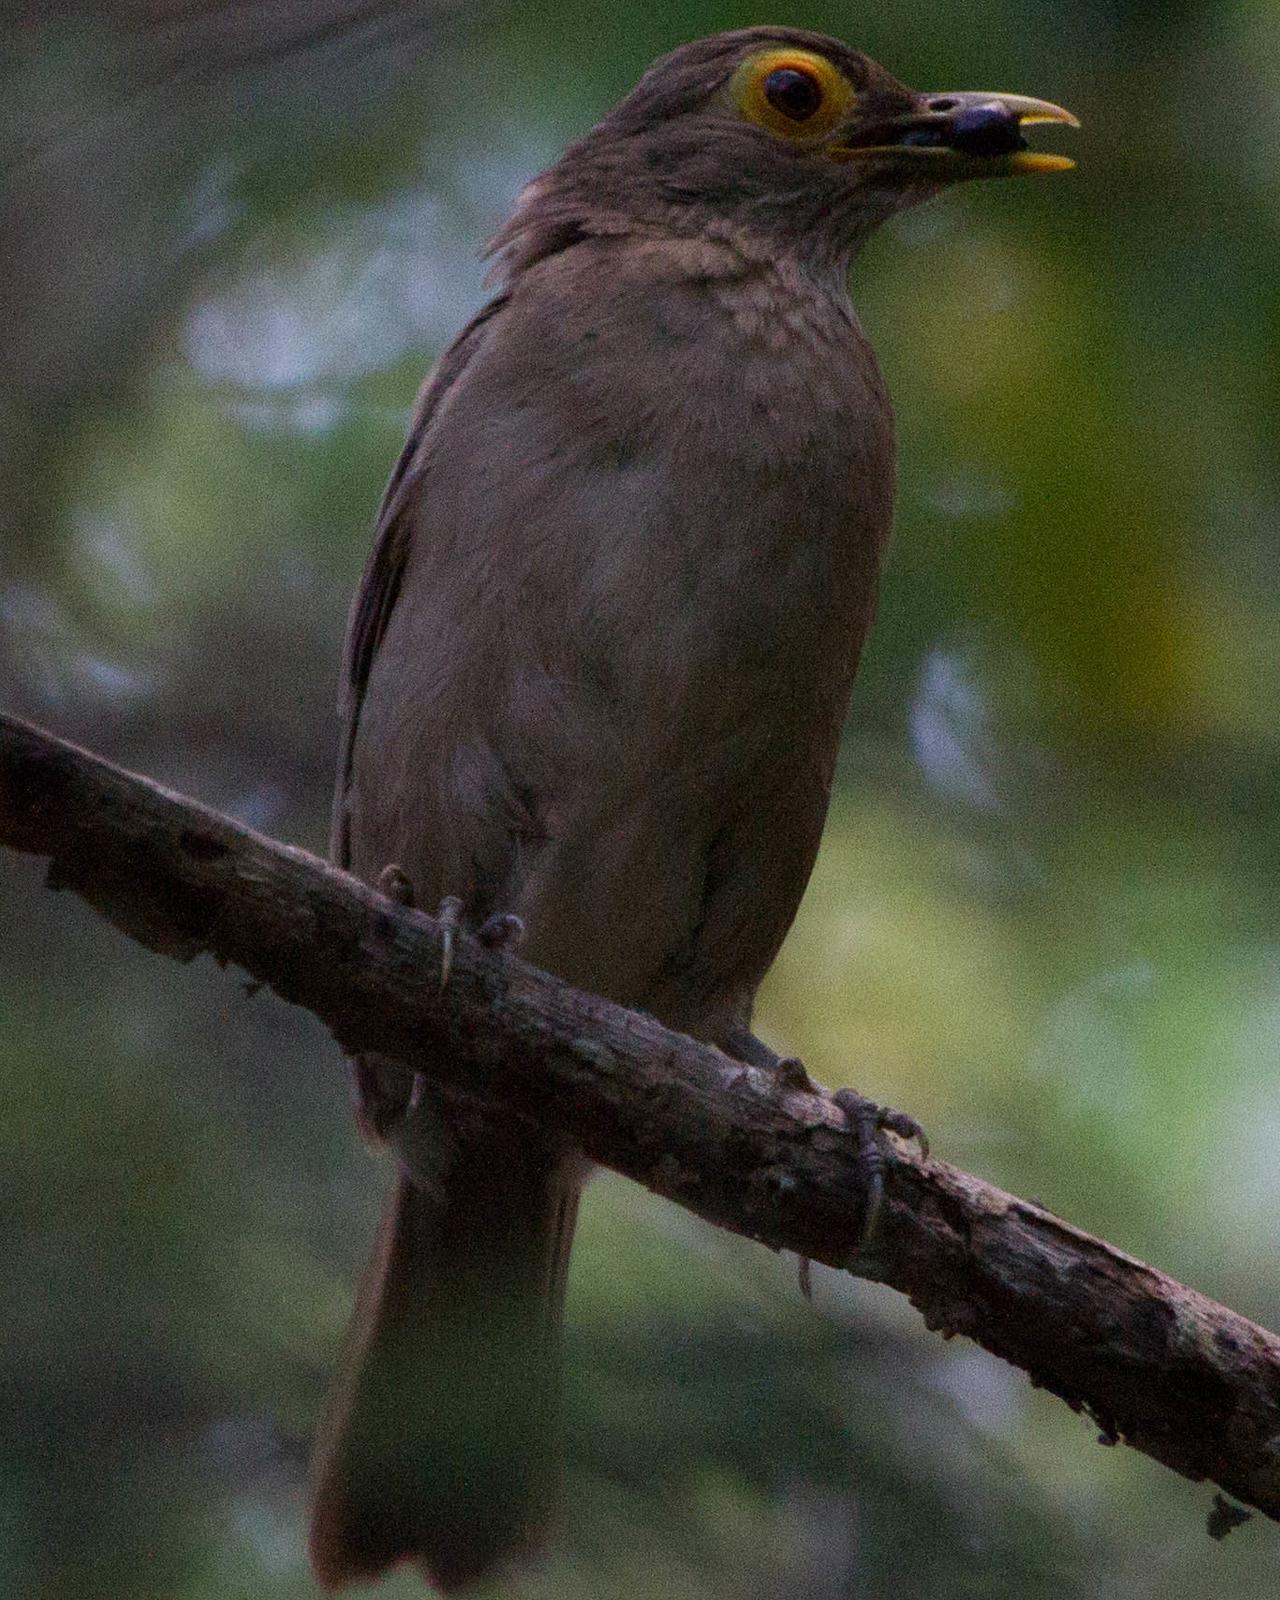 Spectacled Thrush Photo by Jeff Gerbracht